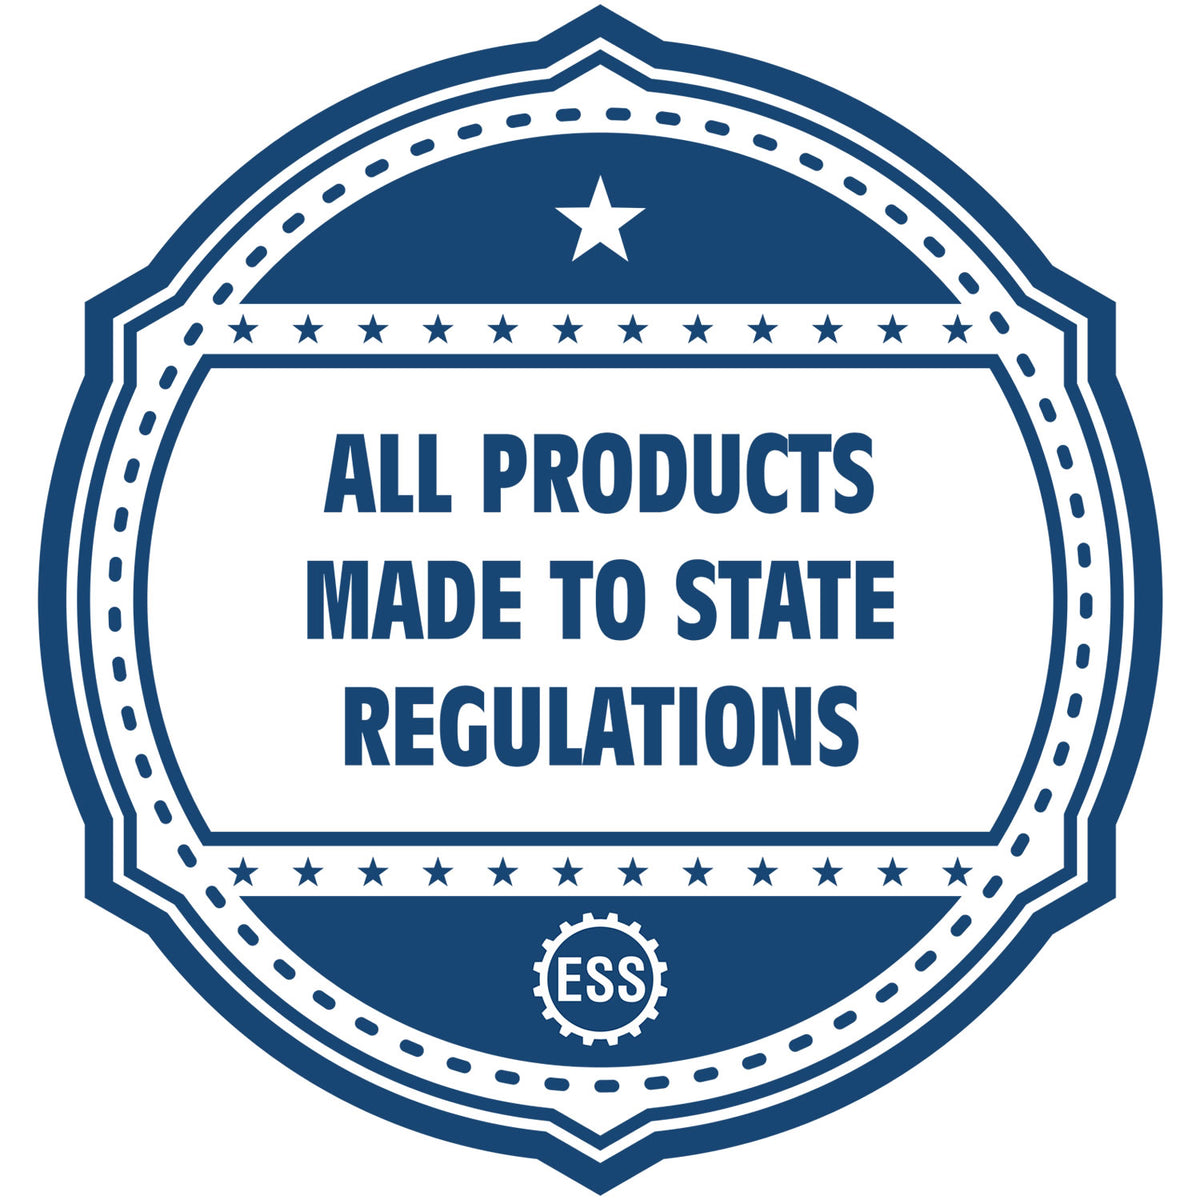 A blue icon or badge for the Gift Washington Landscape Architect Seal showing that this product is made in compliance with state regulations.